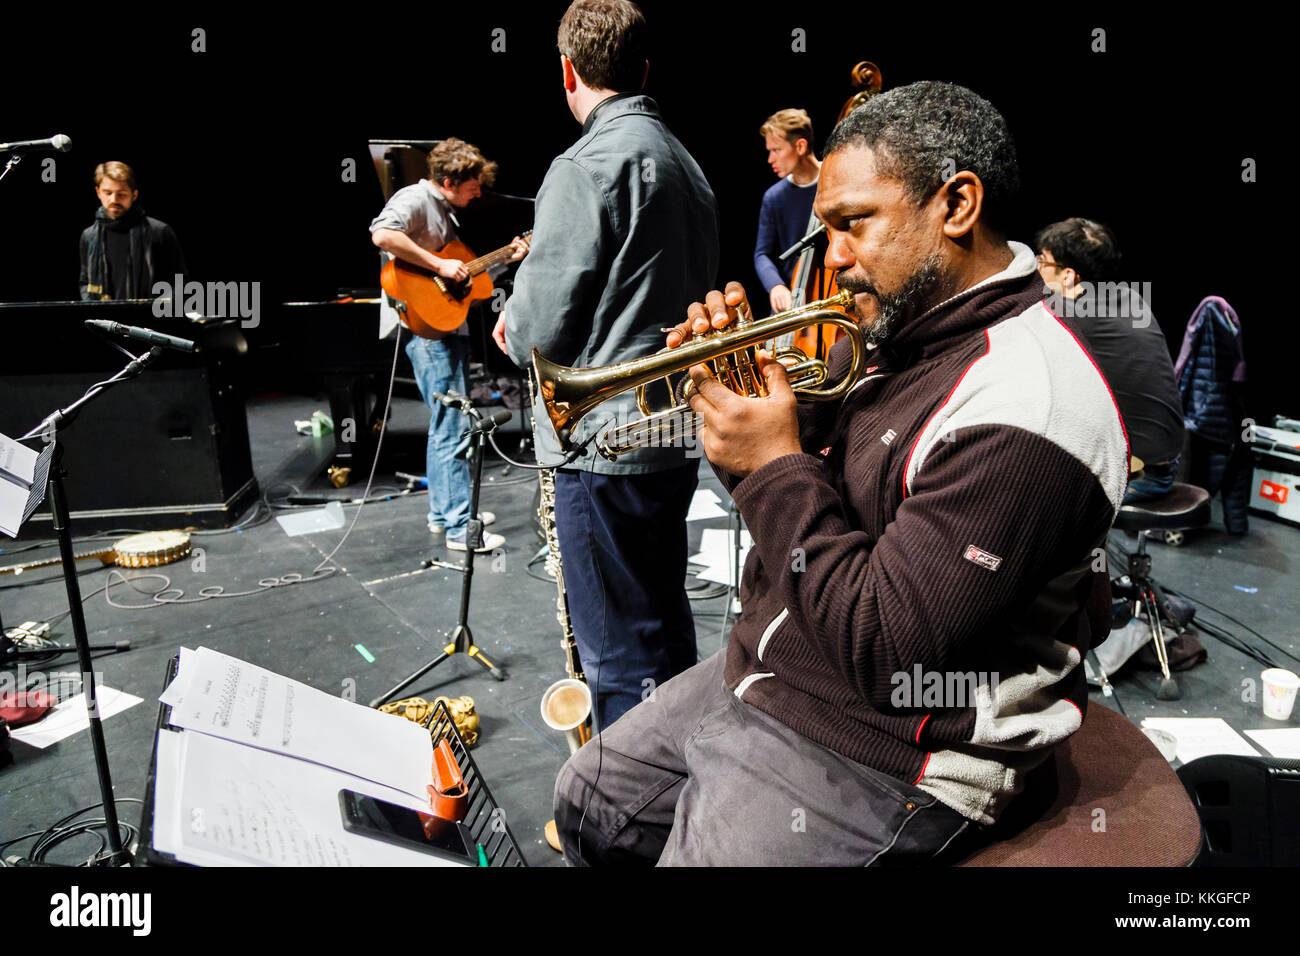 Sam Amidon rehearsing on stage with friends at the Lawrence Batley Theatre during the Huddersfield Contemporary Music Festival, 2017 Stock Photo